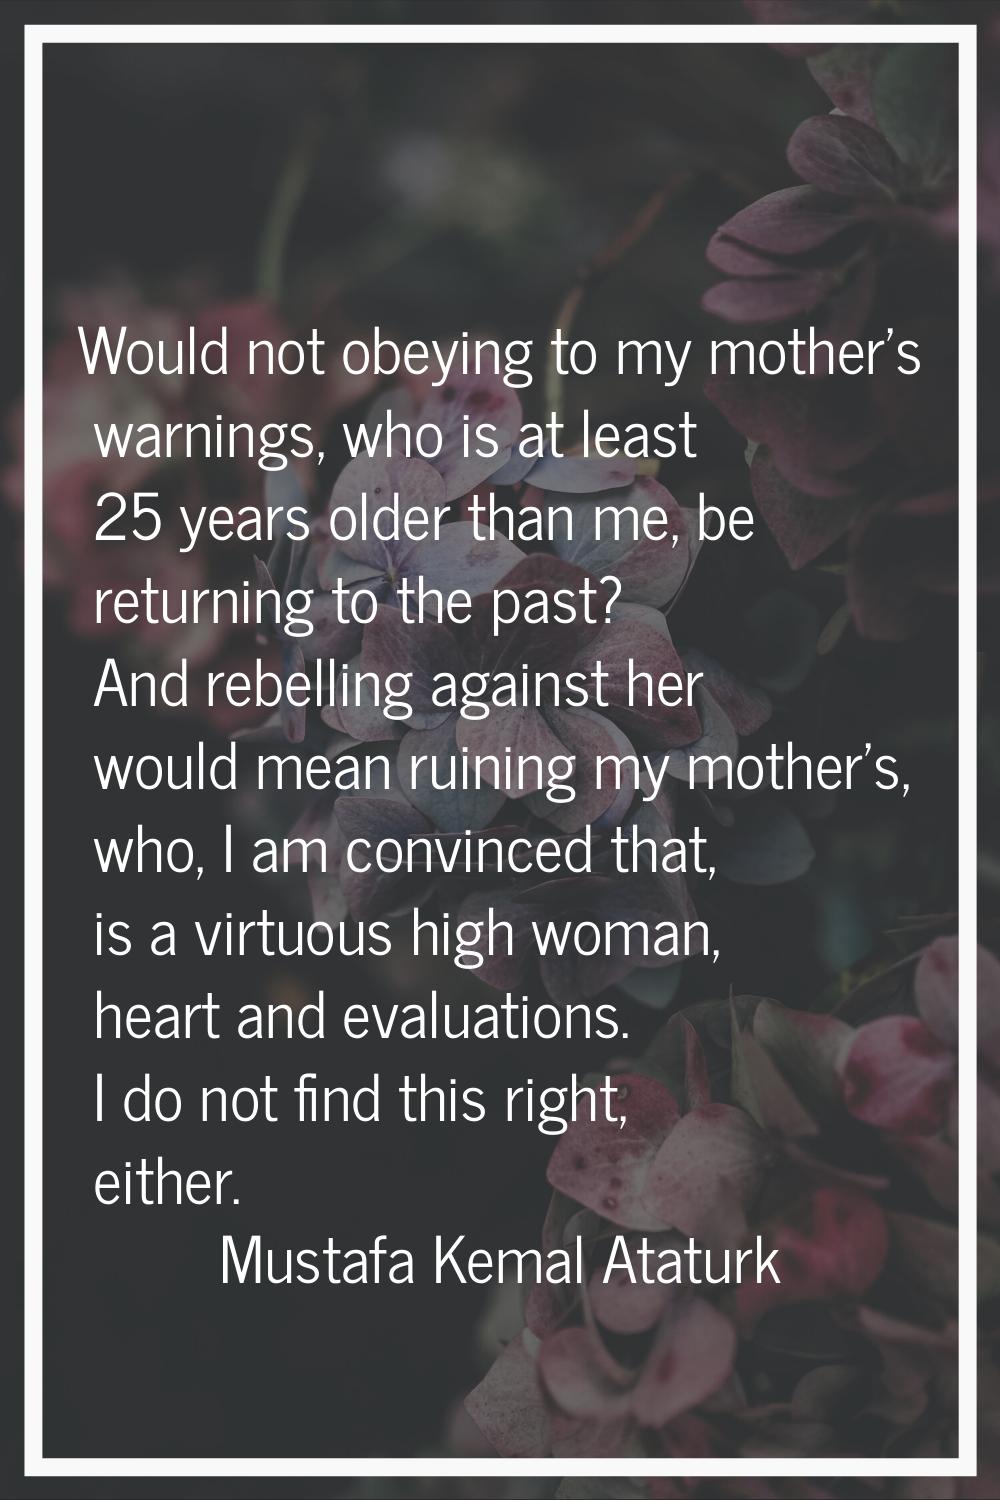 Would not obeying to my mother's warnings, who is at least 25 years older than me, be returning to 